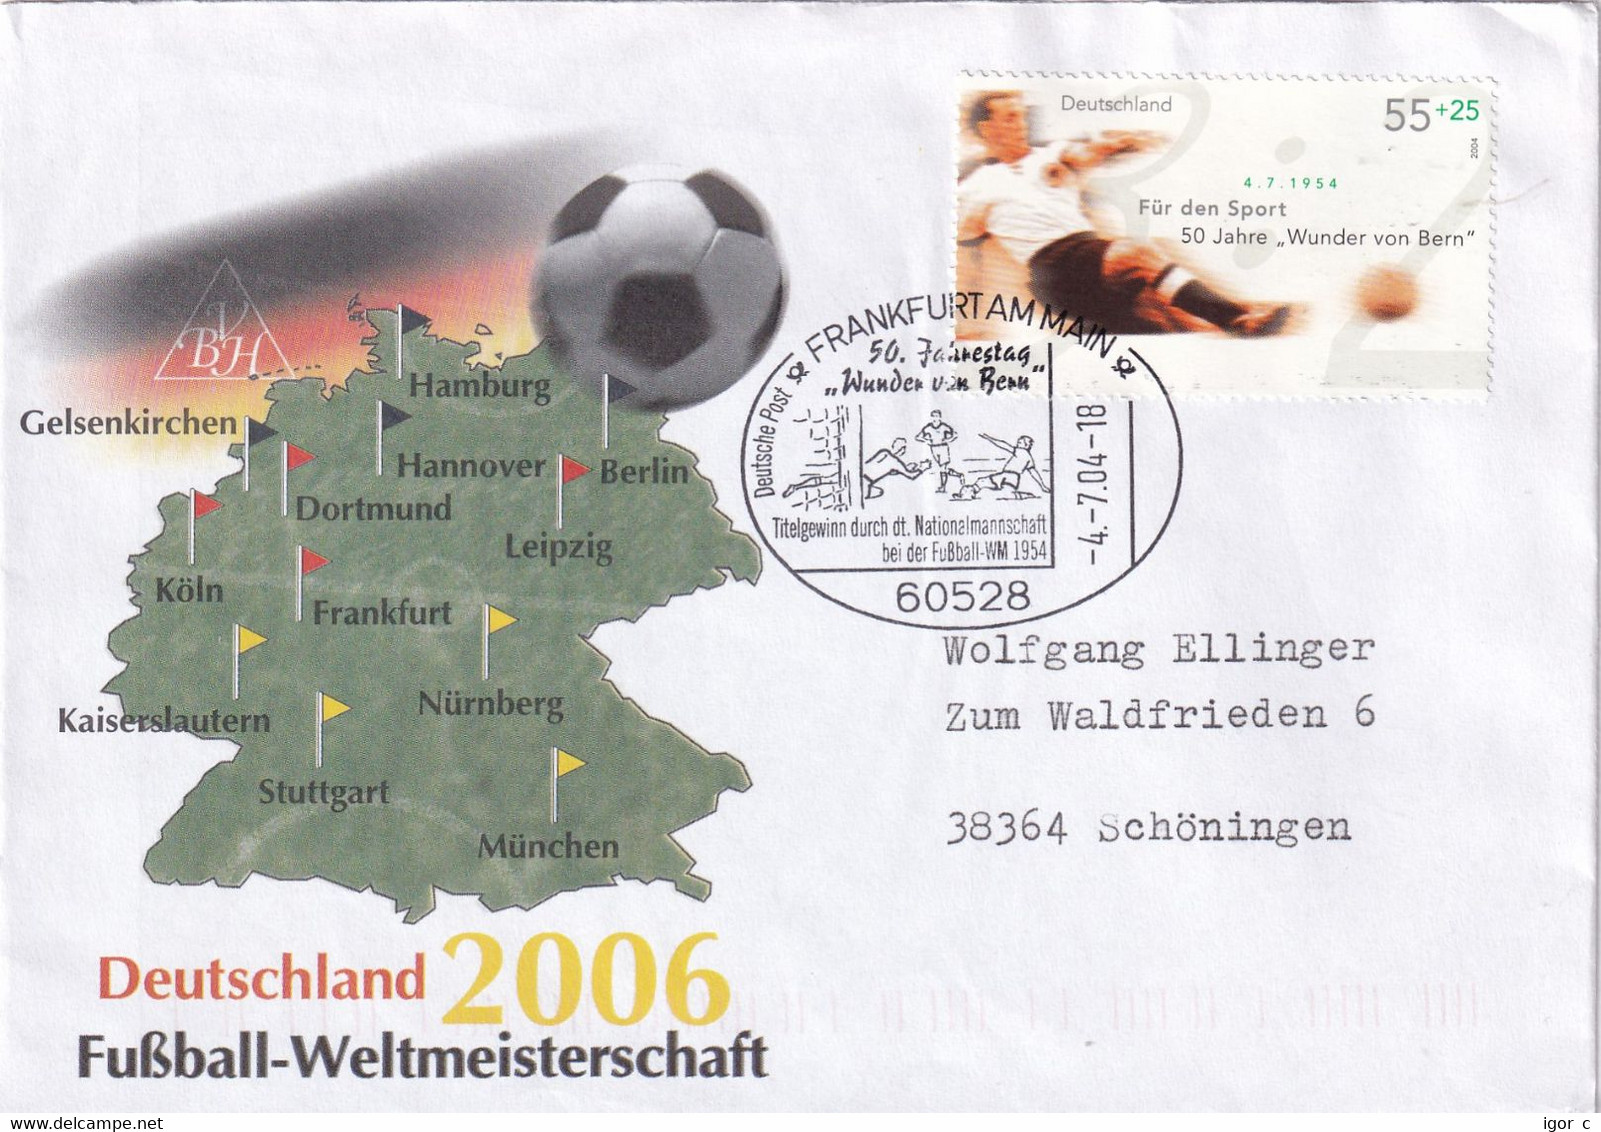 Germany 2004 Cover; Football Fussball Soccer Calcio: FIFA World Cup 1954: 50 Jahre Wunder Von Bern; 2006 Host Cities - 1954 – Suisse